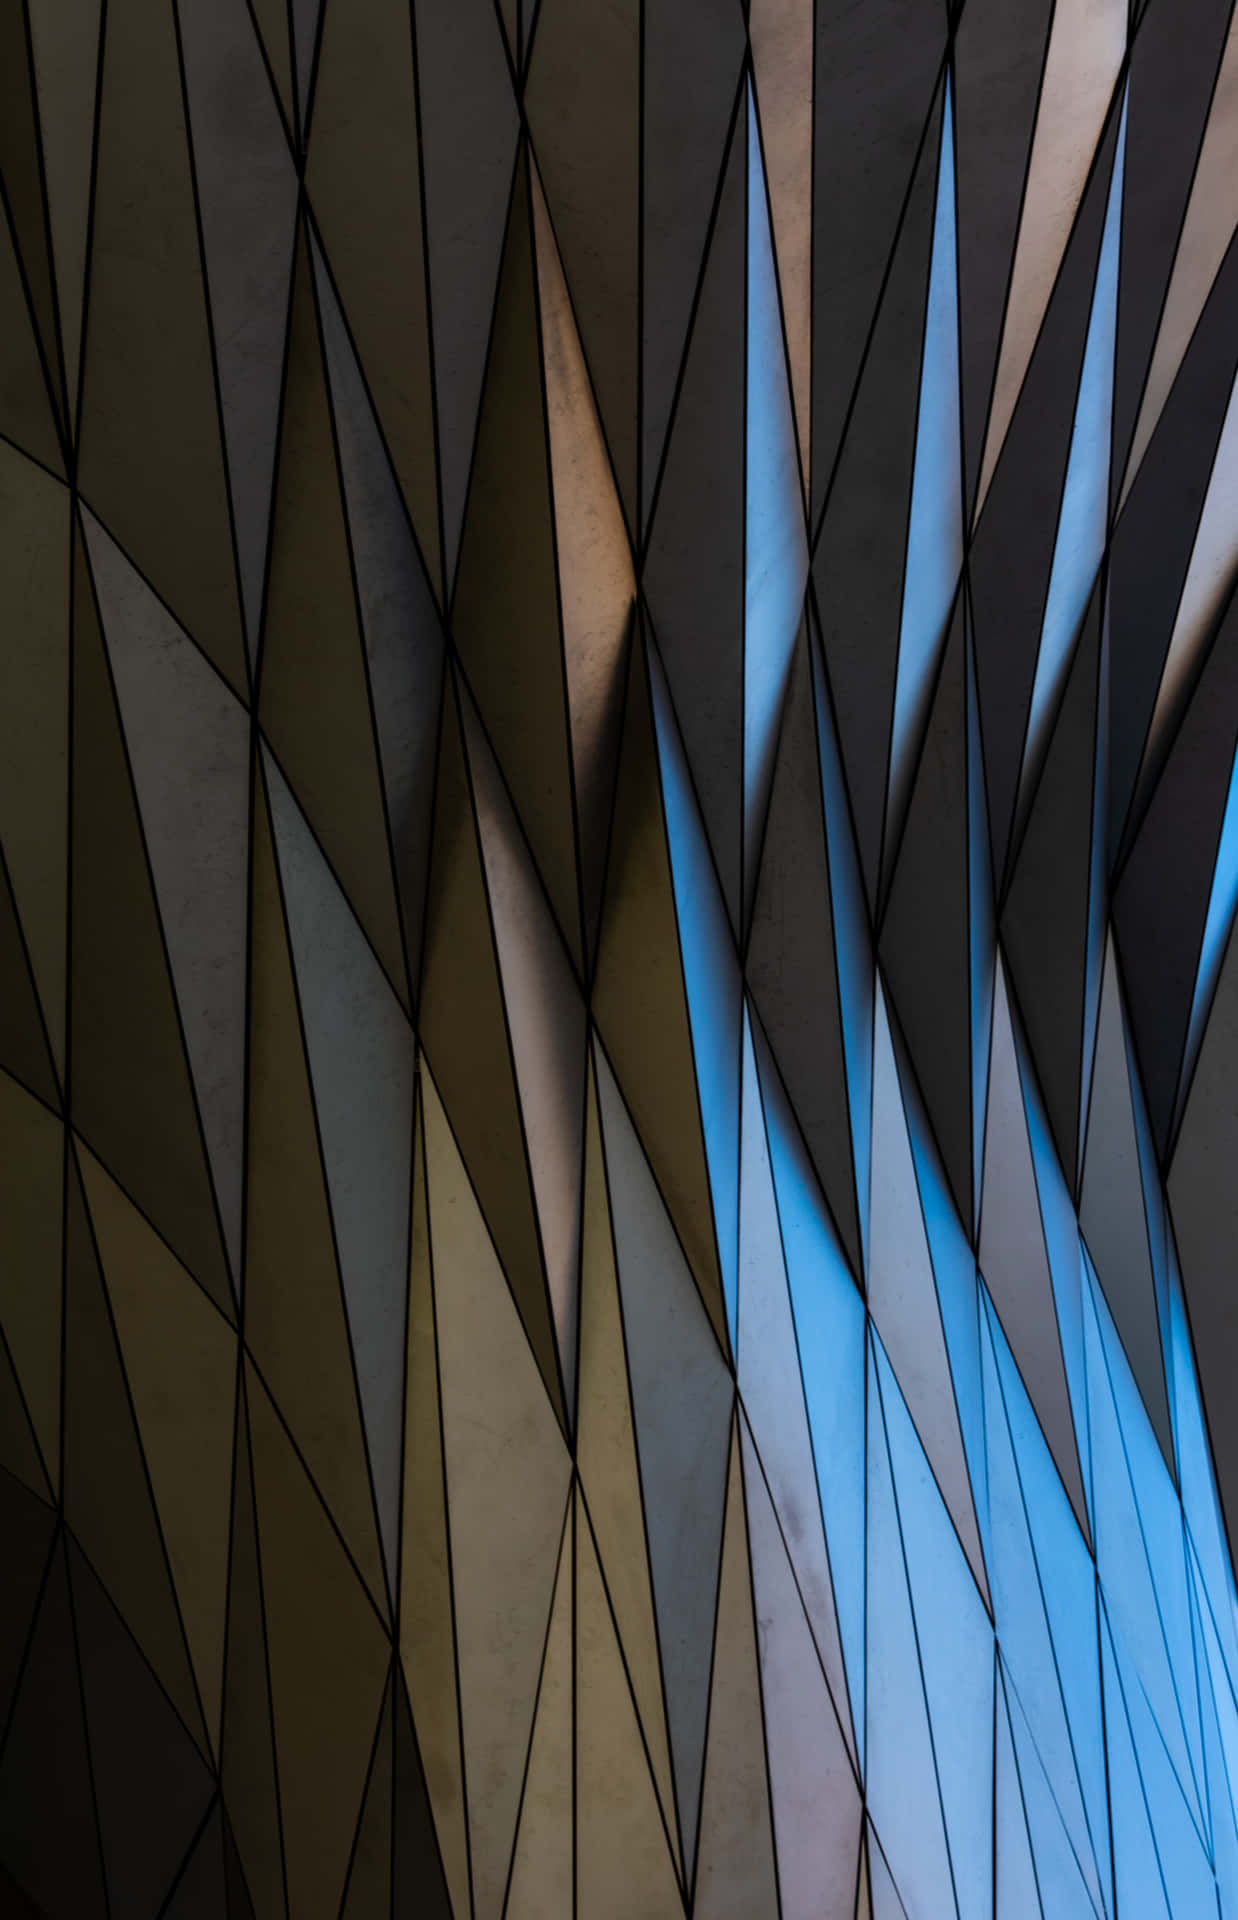 A Building With A Blue And Black Pattern